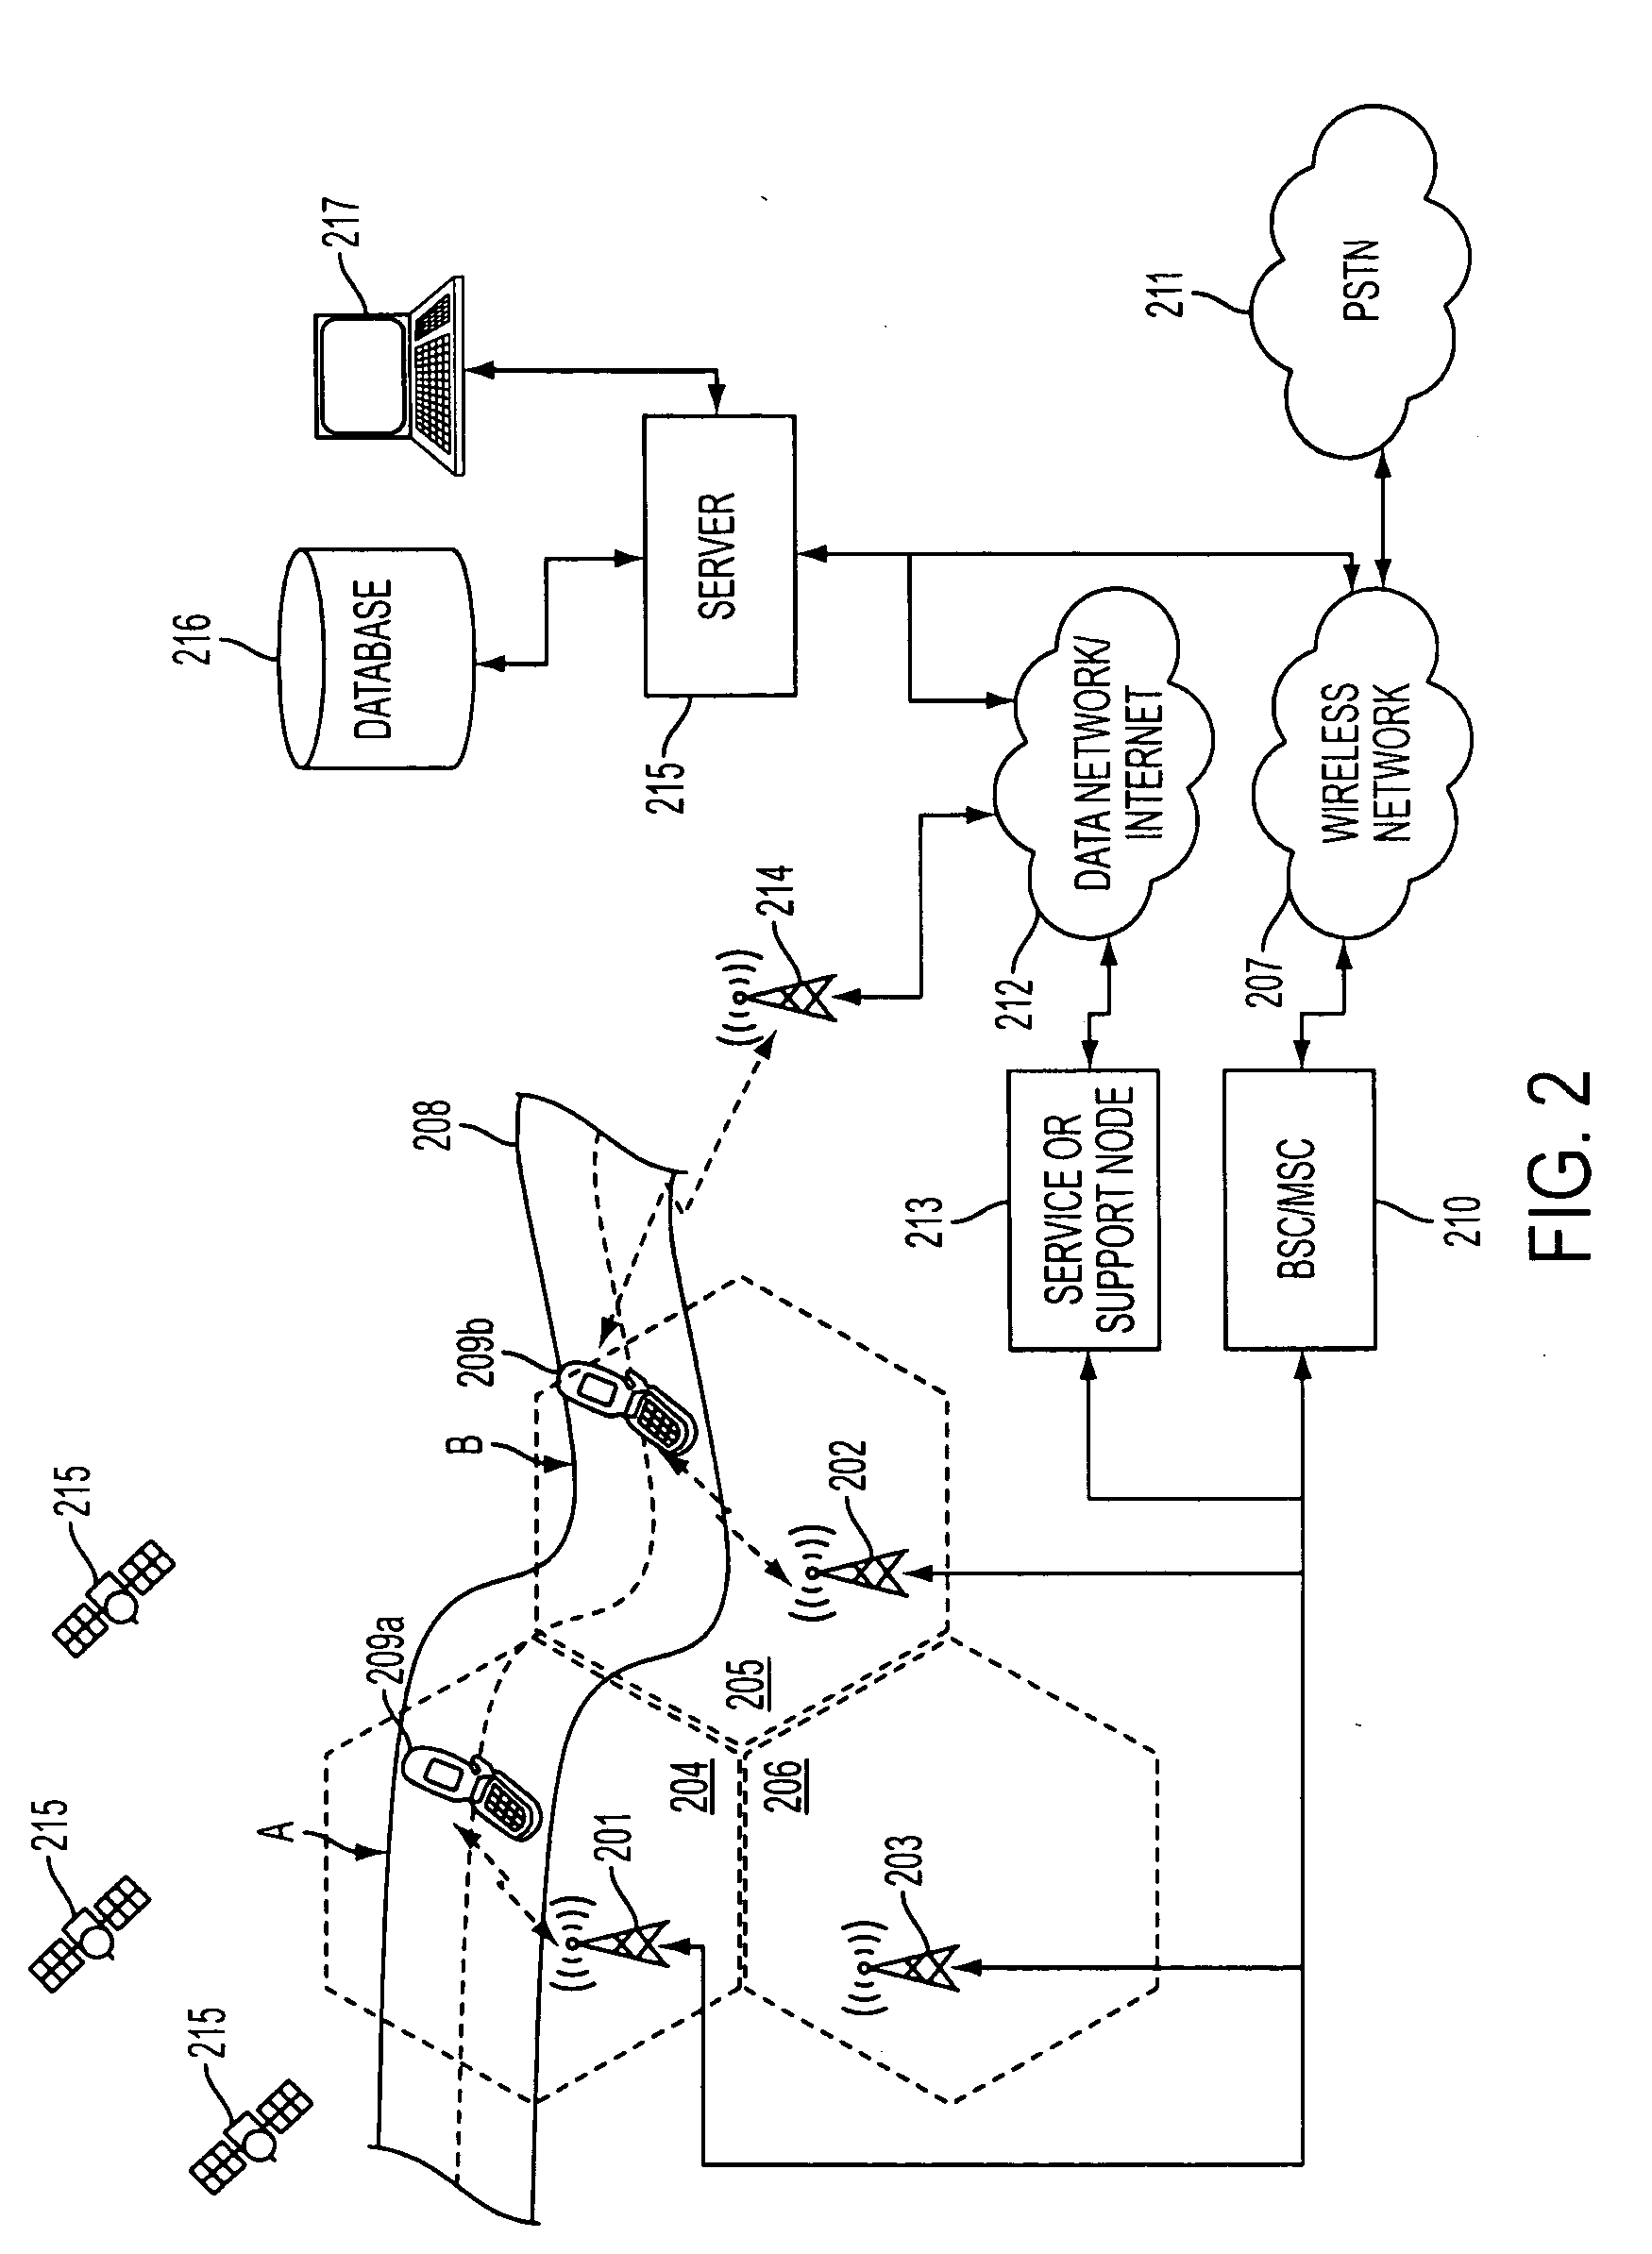 System and method for analyzing traffic flow